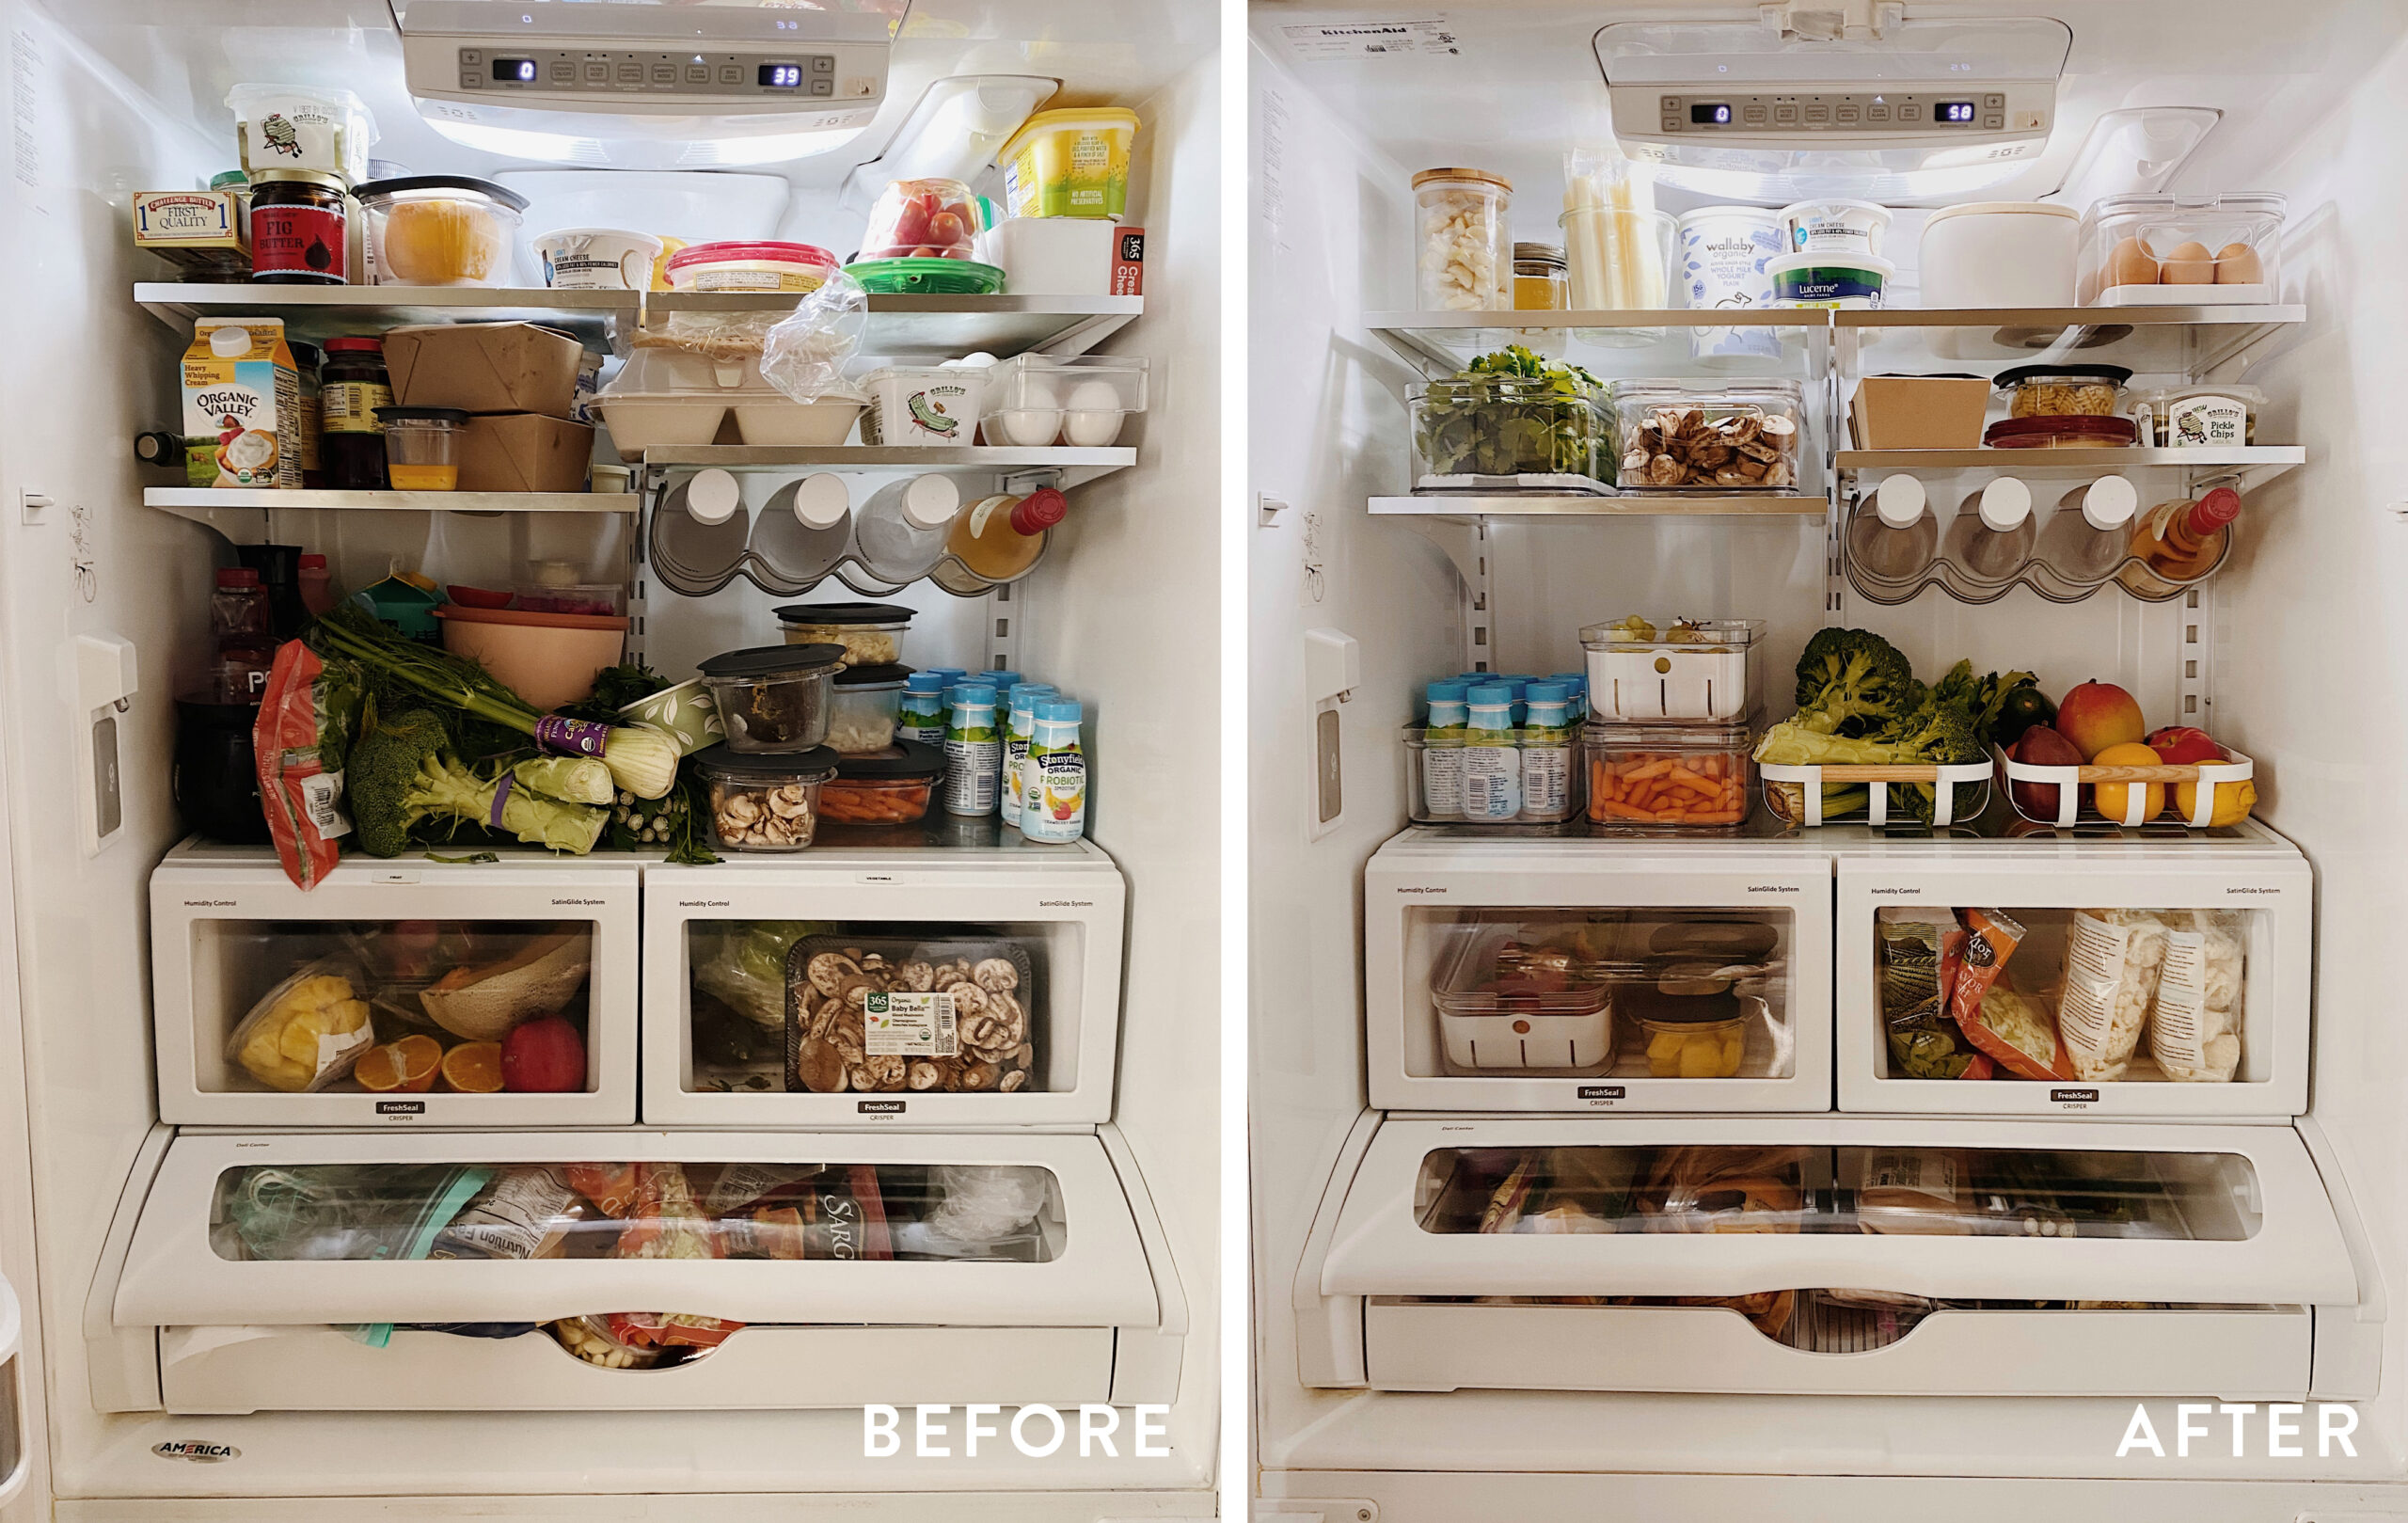 https://almostmakesperfect.com/wp-content/uploads/2021/02/fridge-before-and-after-copy-scaled-1.jpg